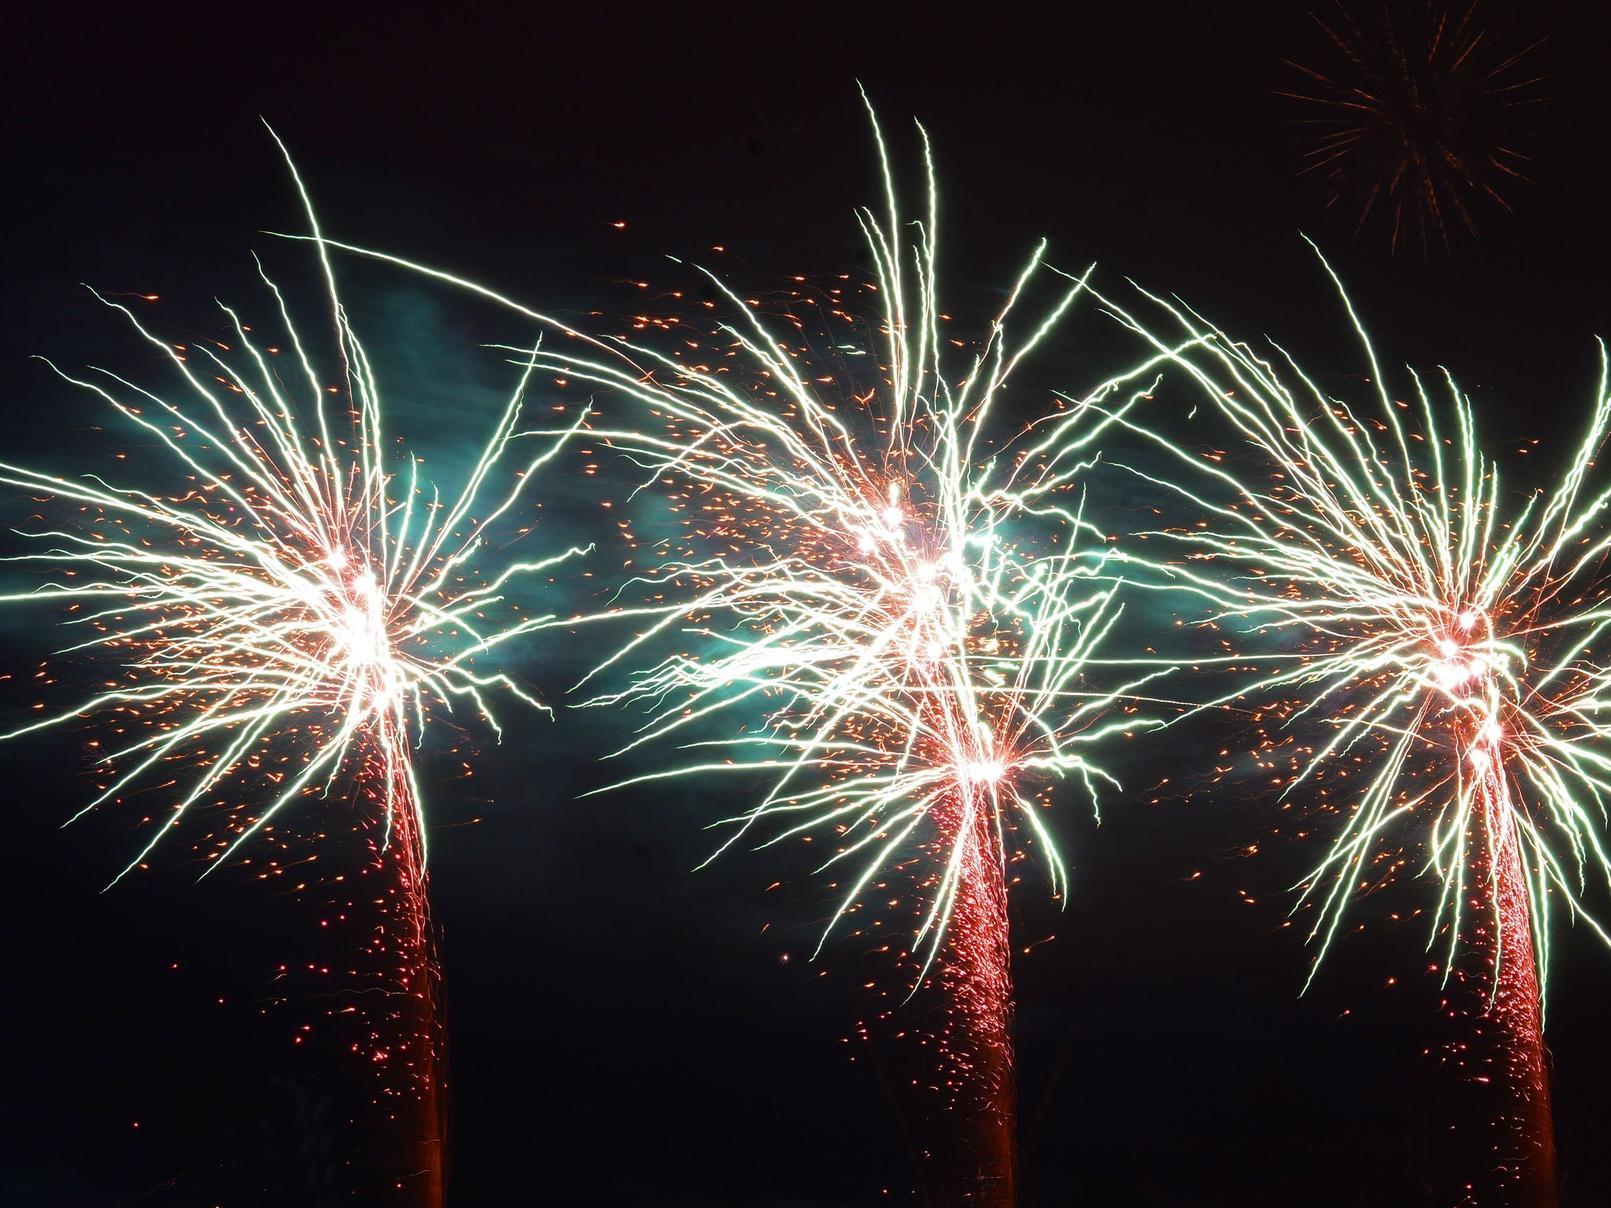 At Cloughton and Burniston Village Hall organisers will light the bonfire at 6.30pm and the fireworks begin at 7pm. Gates open at 5pm.